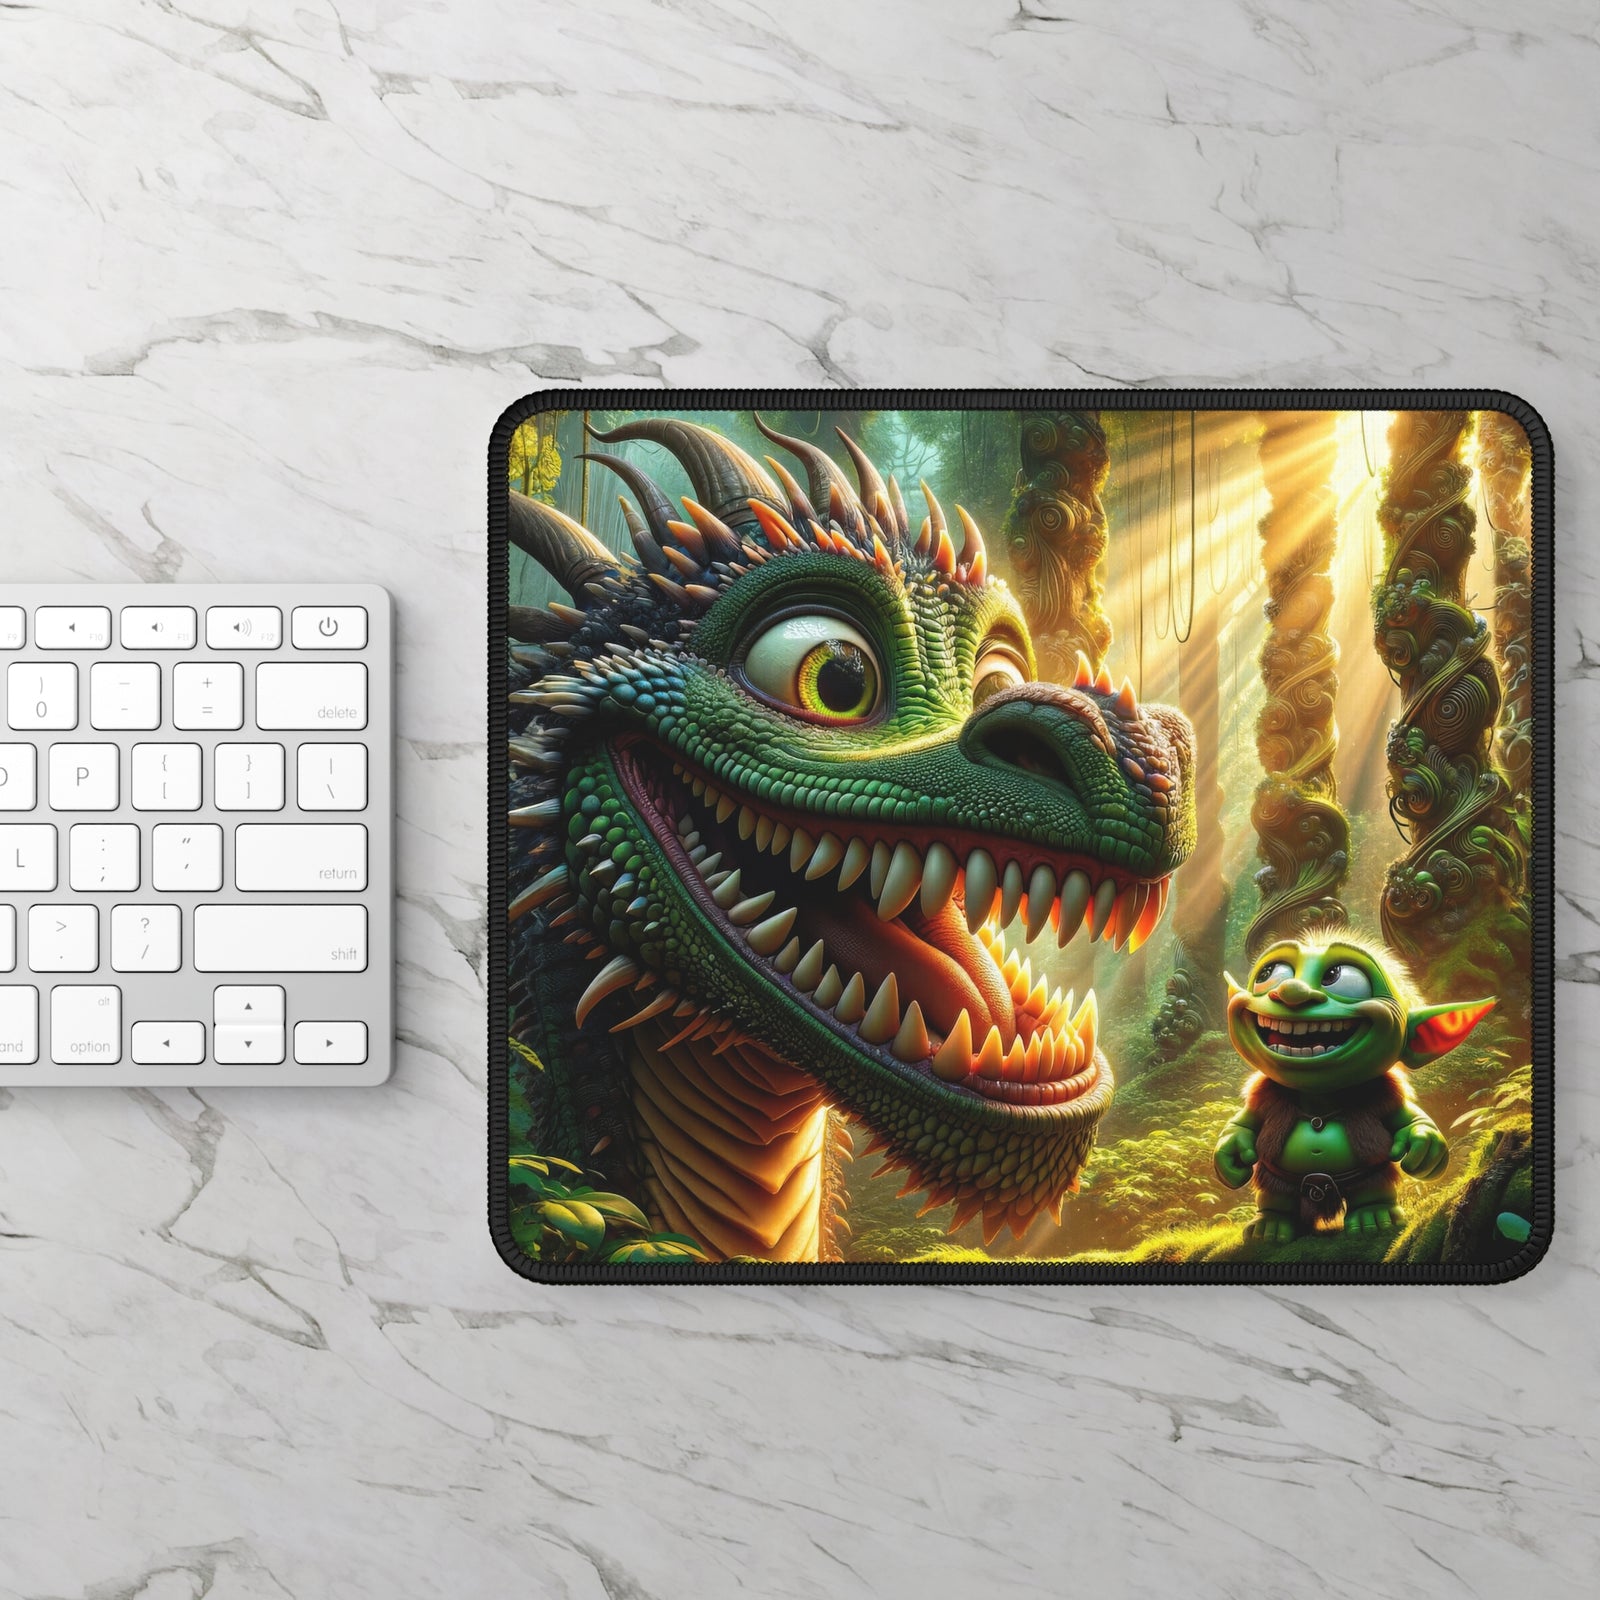 Emerald Guardians - A Tale of Friendship Mouse Pad